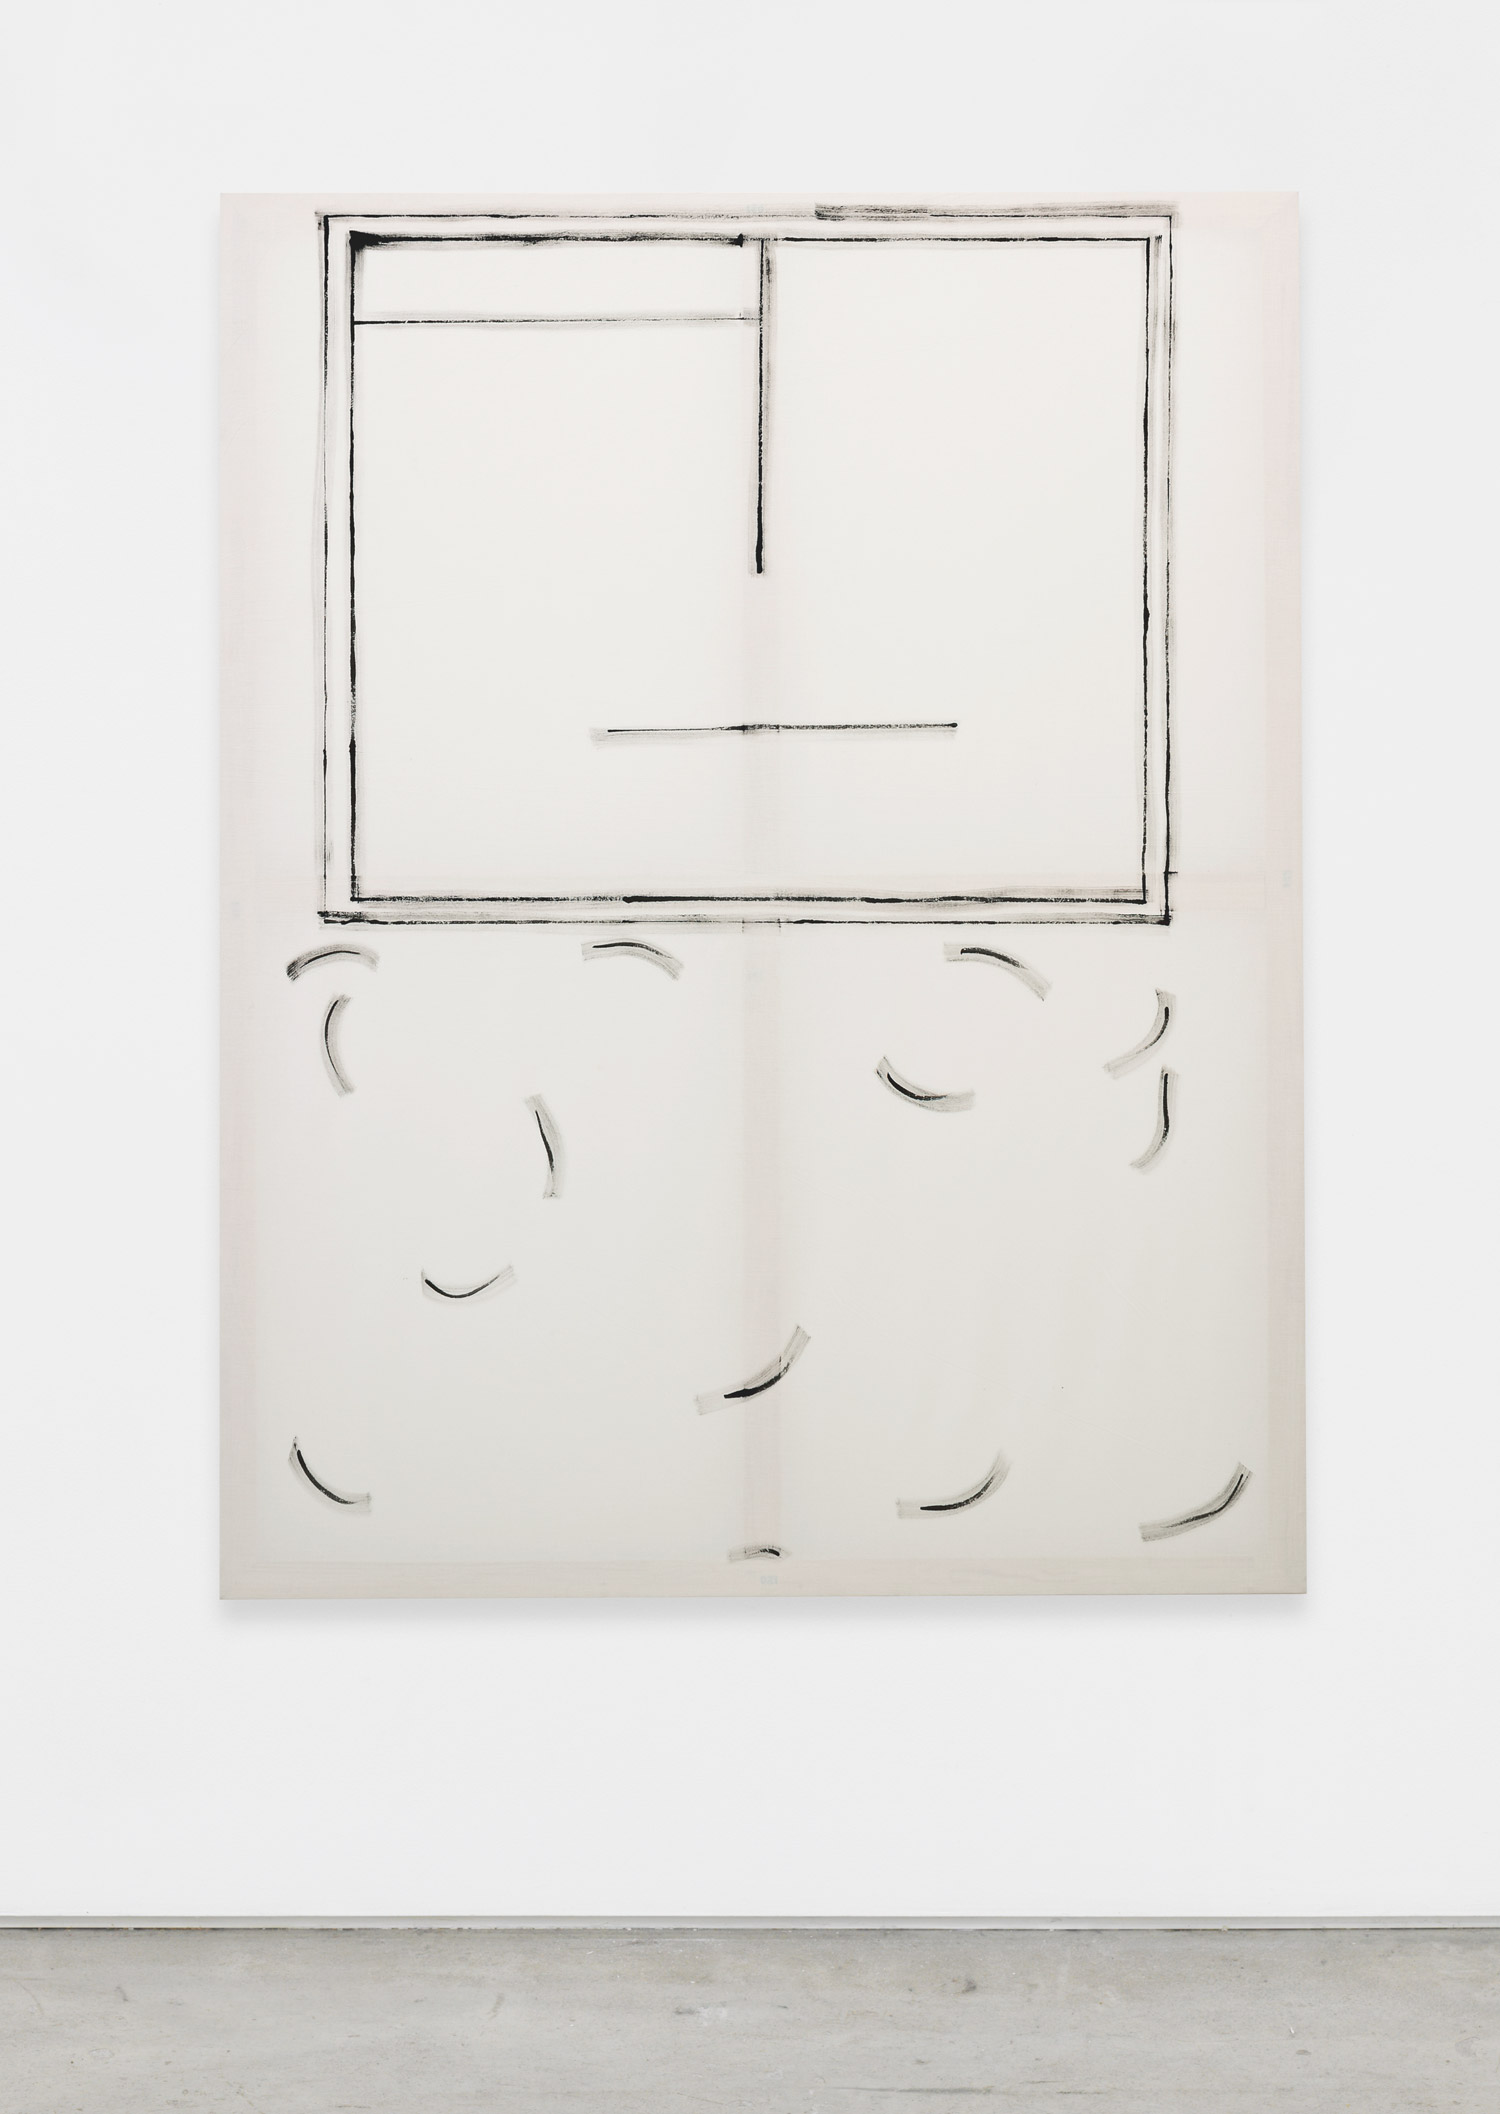 Gerda Scheepers, Situation Room (white), 2013, acrylic on fabric, 61.02h x 47.24w in.